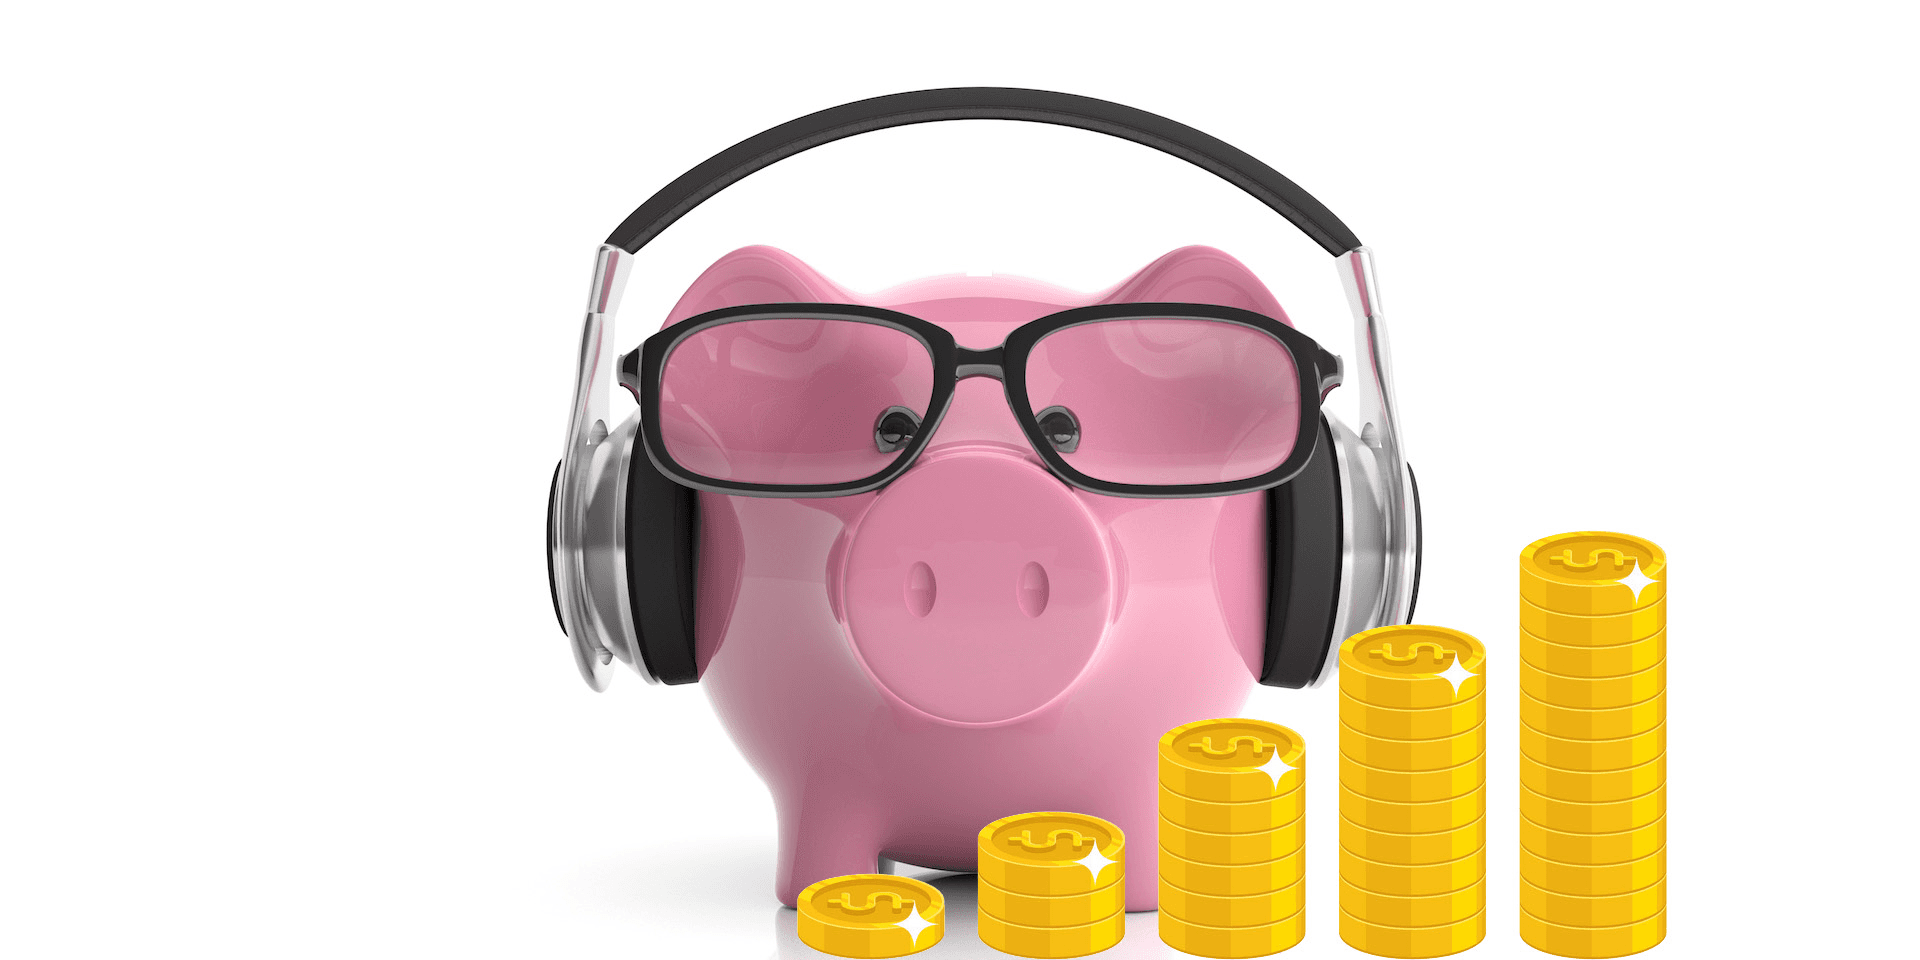 How to save money on your online digital music